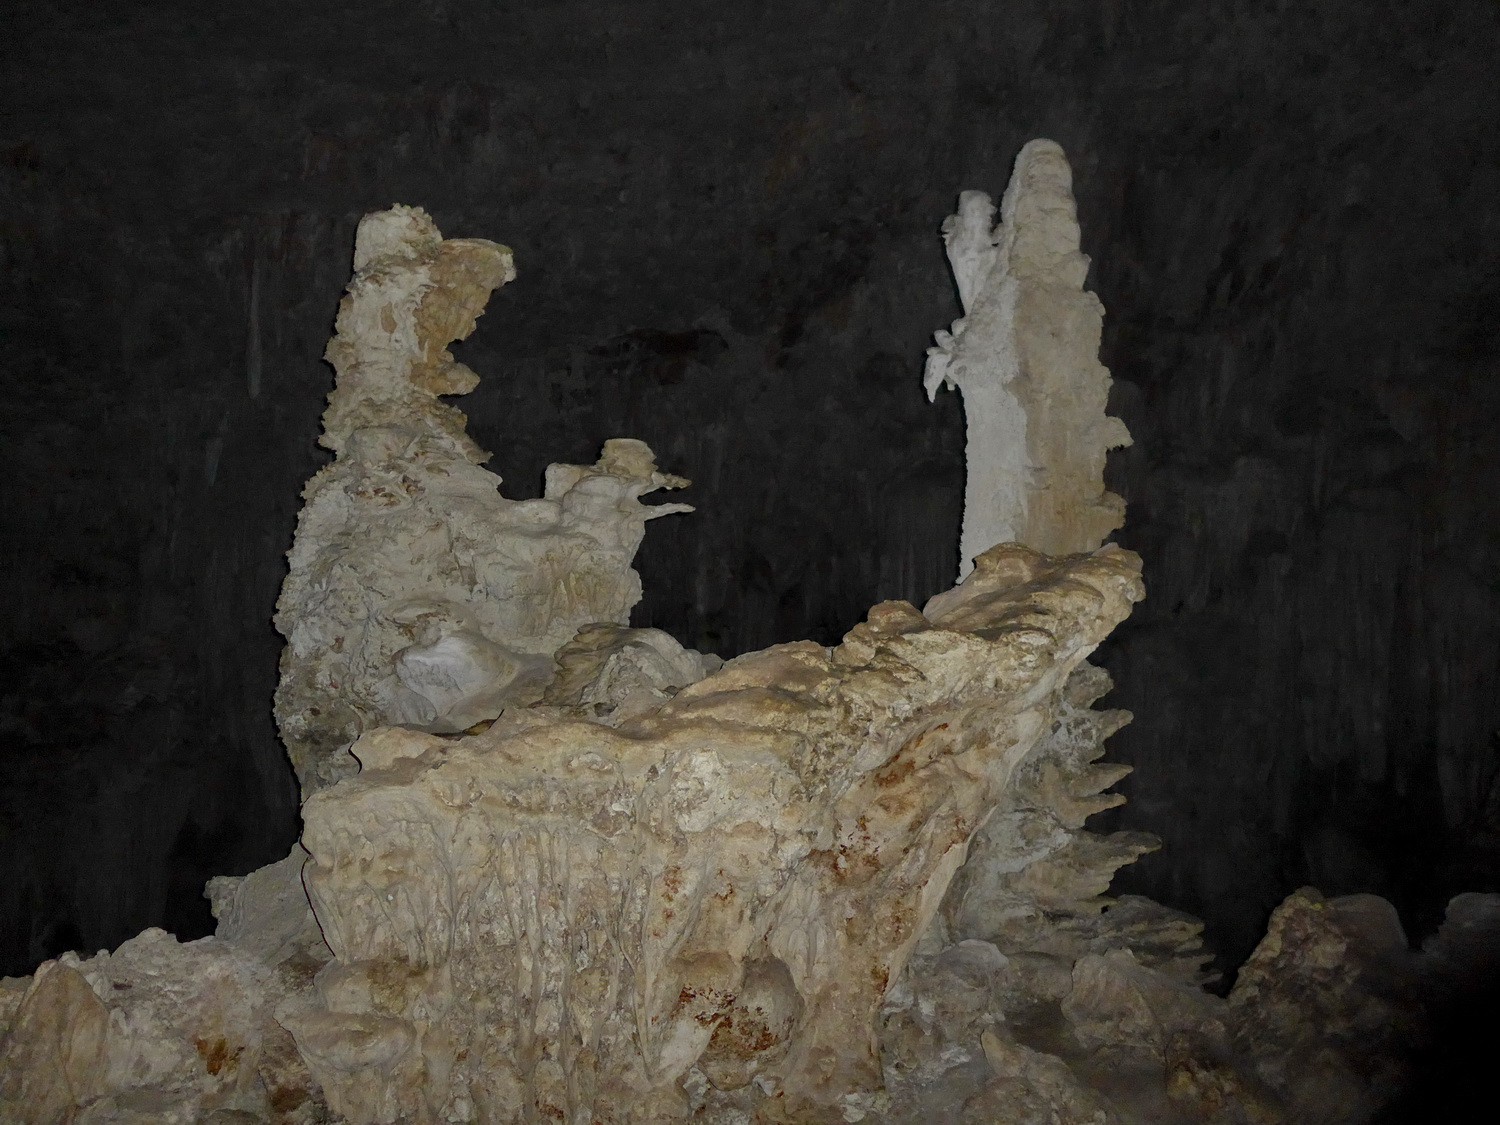 Holy Mary in the cave (right)